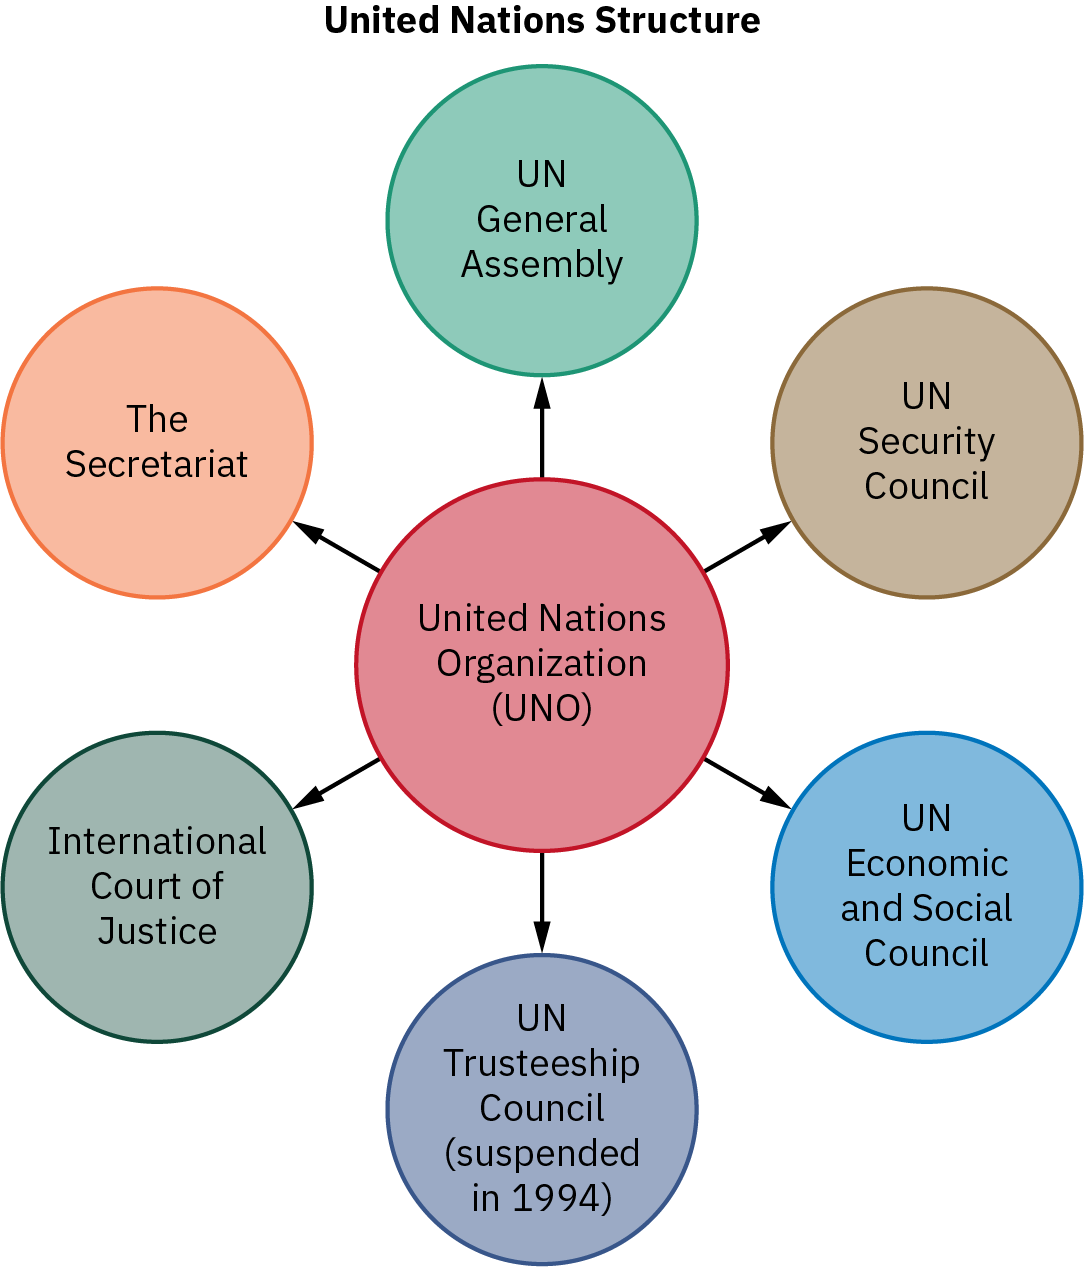 An organizer shows the main bodies of the United Nations: the General Assembly, the Security Council, the Economic and Social Council, the Trusteeship Council, the International Court of Justice, and the Secretariat. The Trusteeship Council was suspended in 1994.